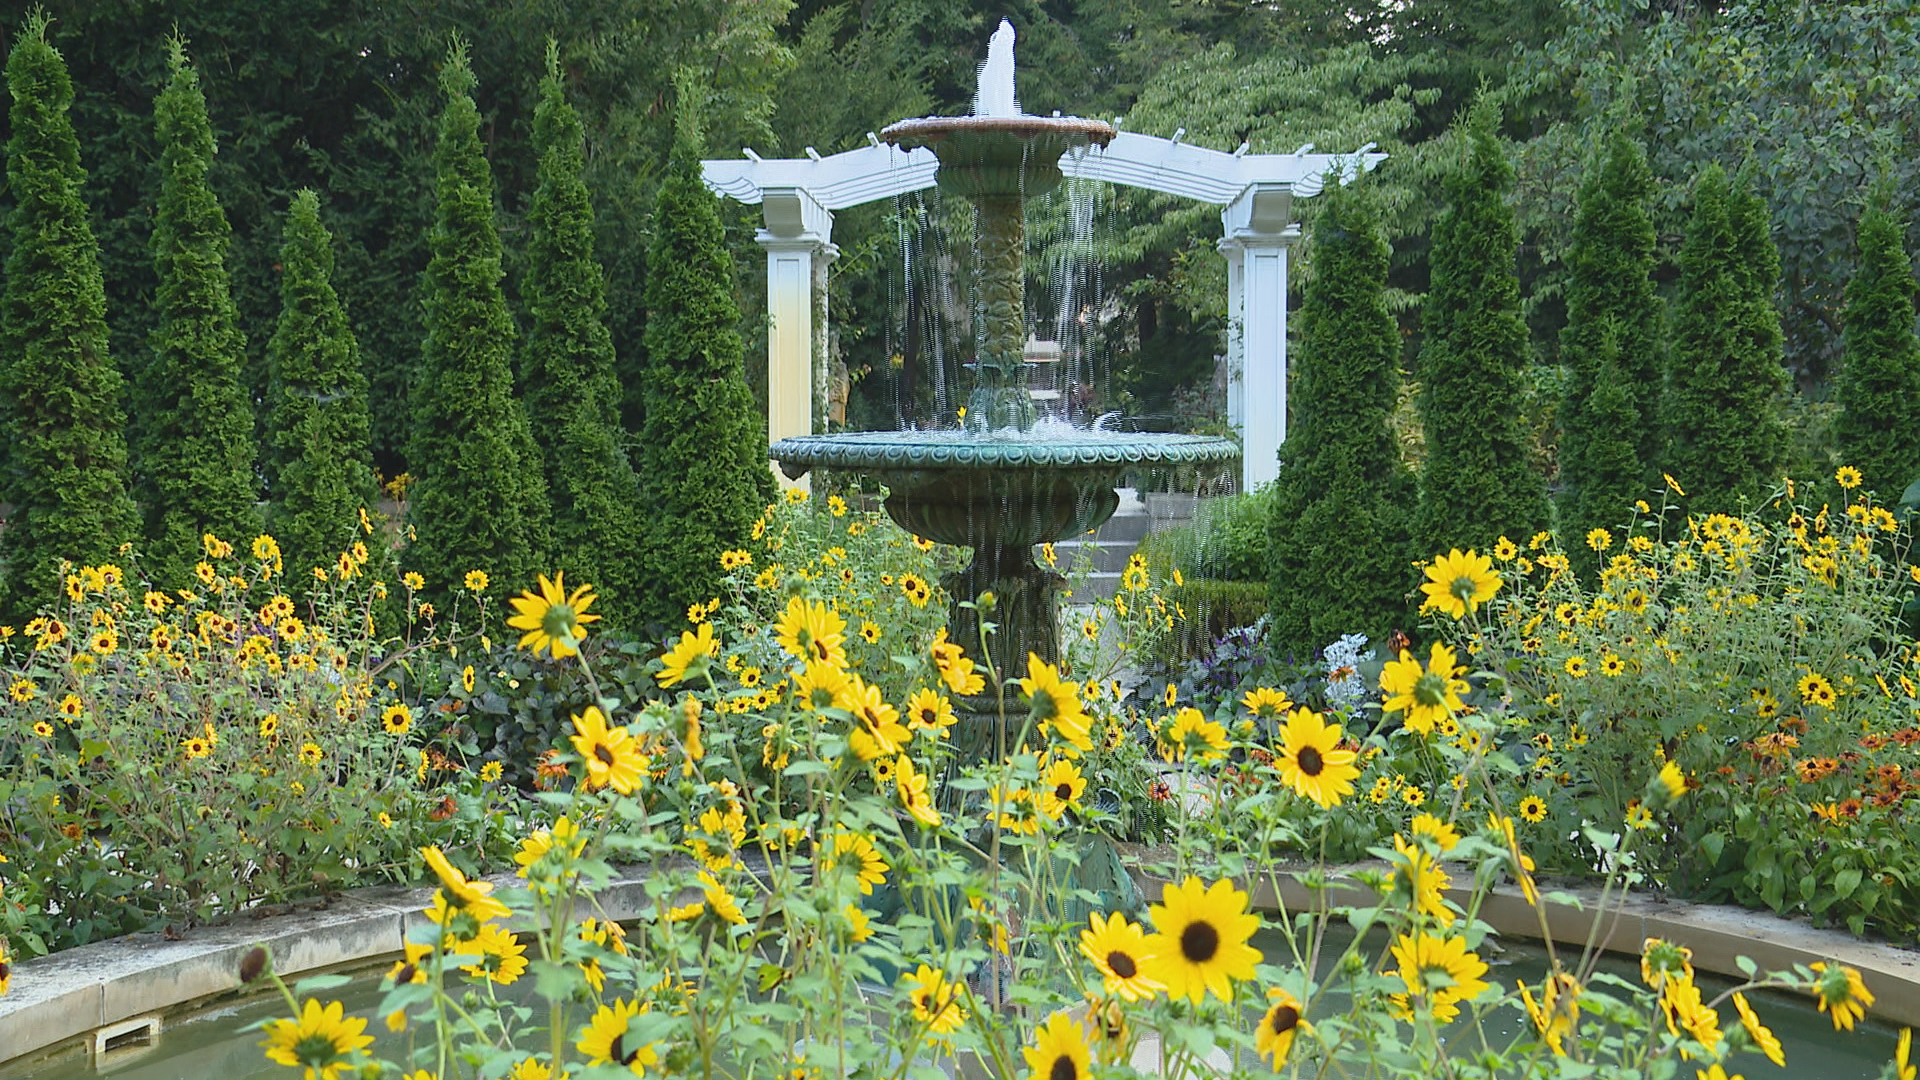 Art and nature have inspired one another in Van Gogh-inspired garden displays at Newfields.